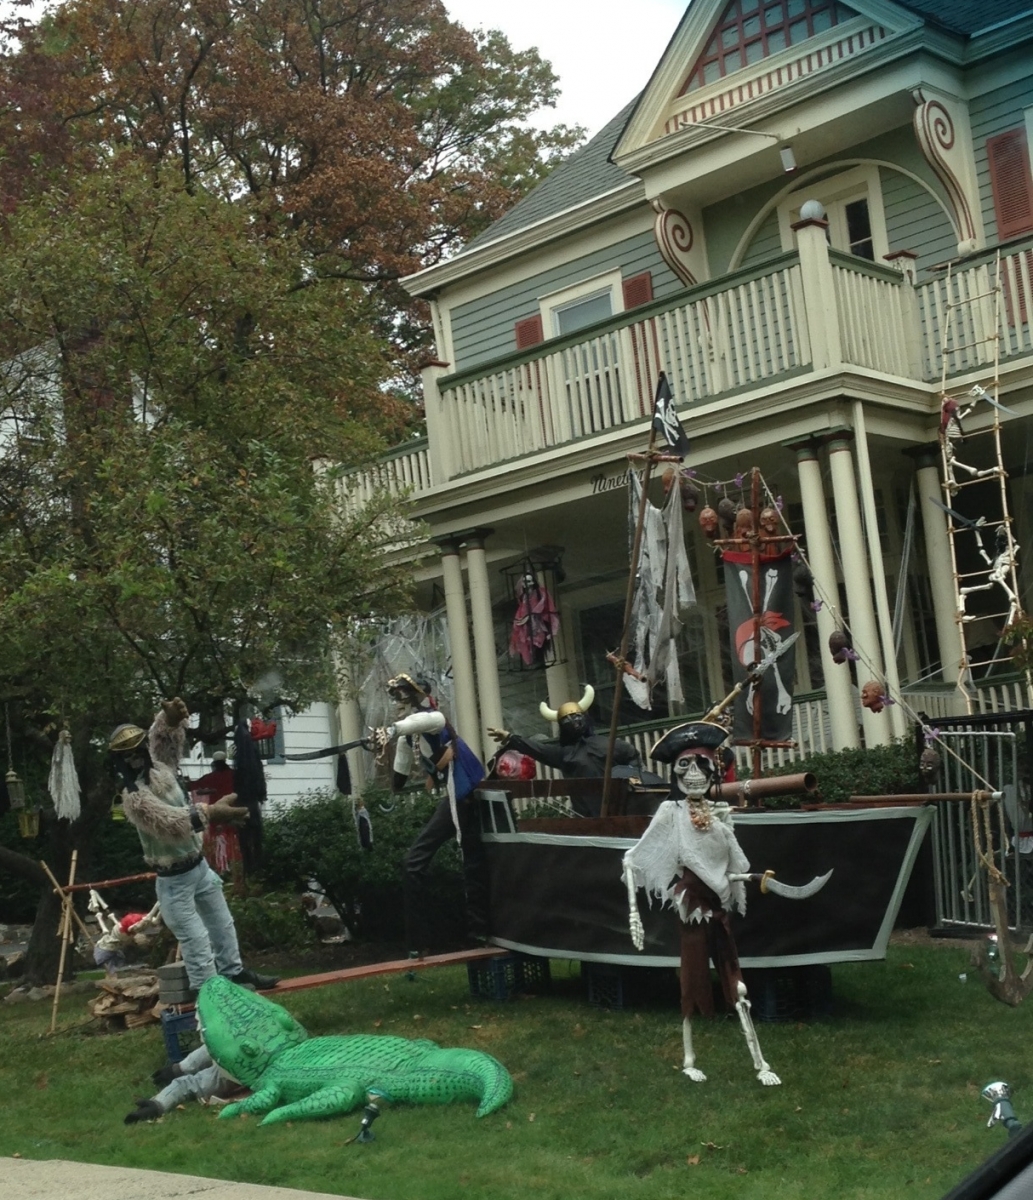 The Most Scary Halloween Decorations